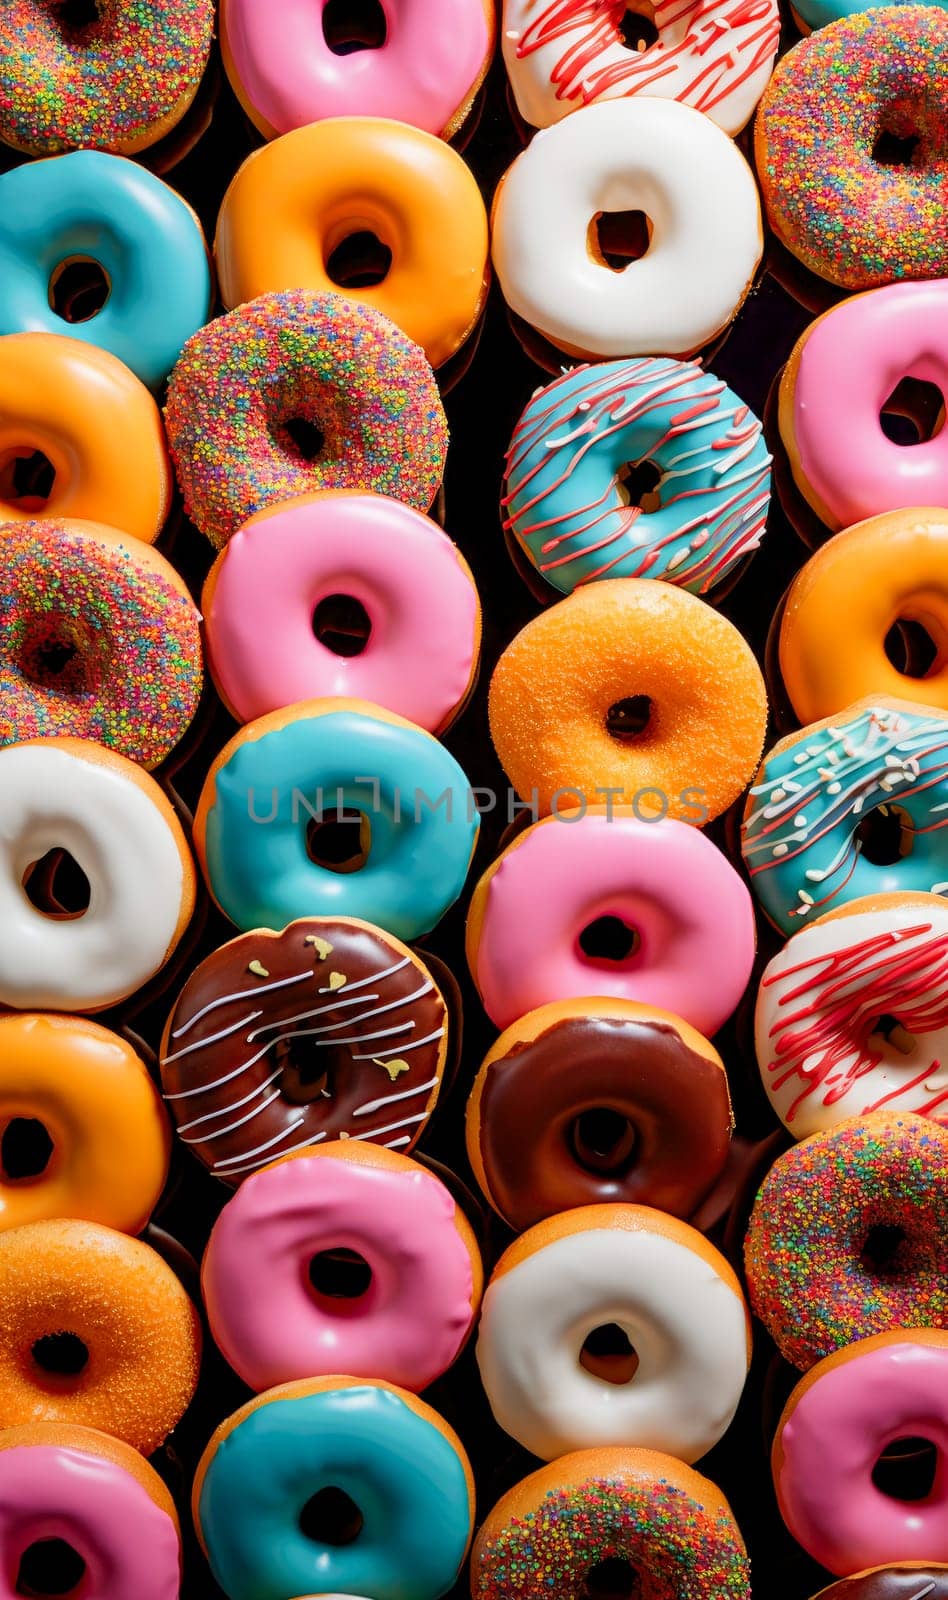 Donuts pattern. Top view of a variety of glazed donuts. Colorful glazed donuts with sprinkles by Ramanouskaya